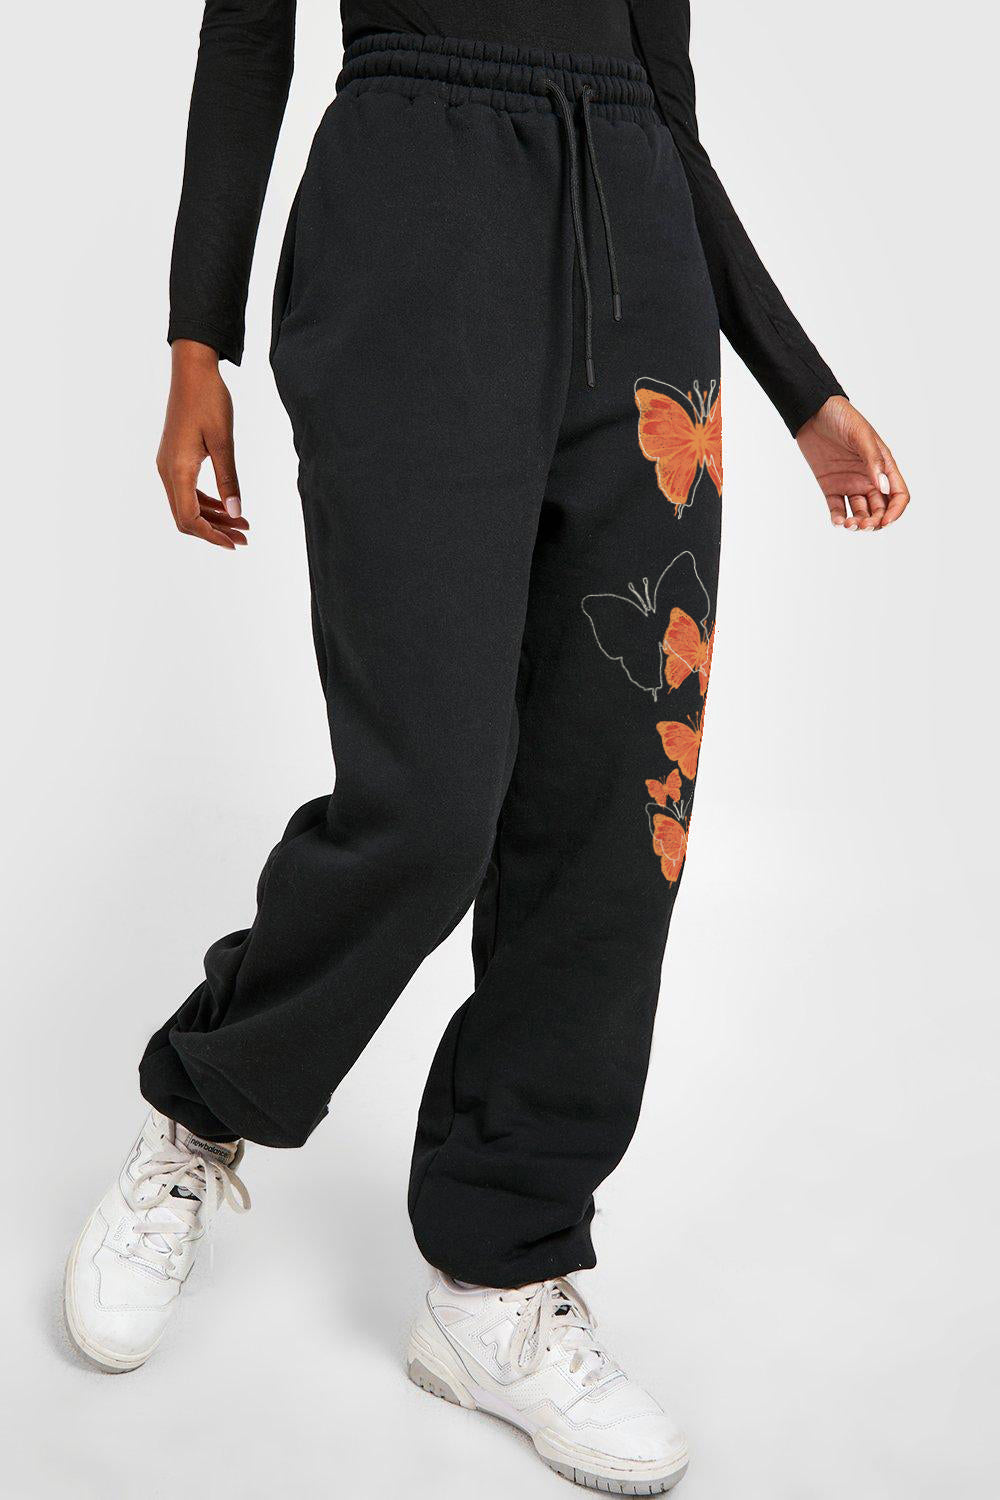 Simply Love Full Size Butterfly Graphic Sweatpants Trendsi